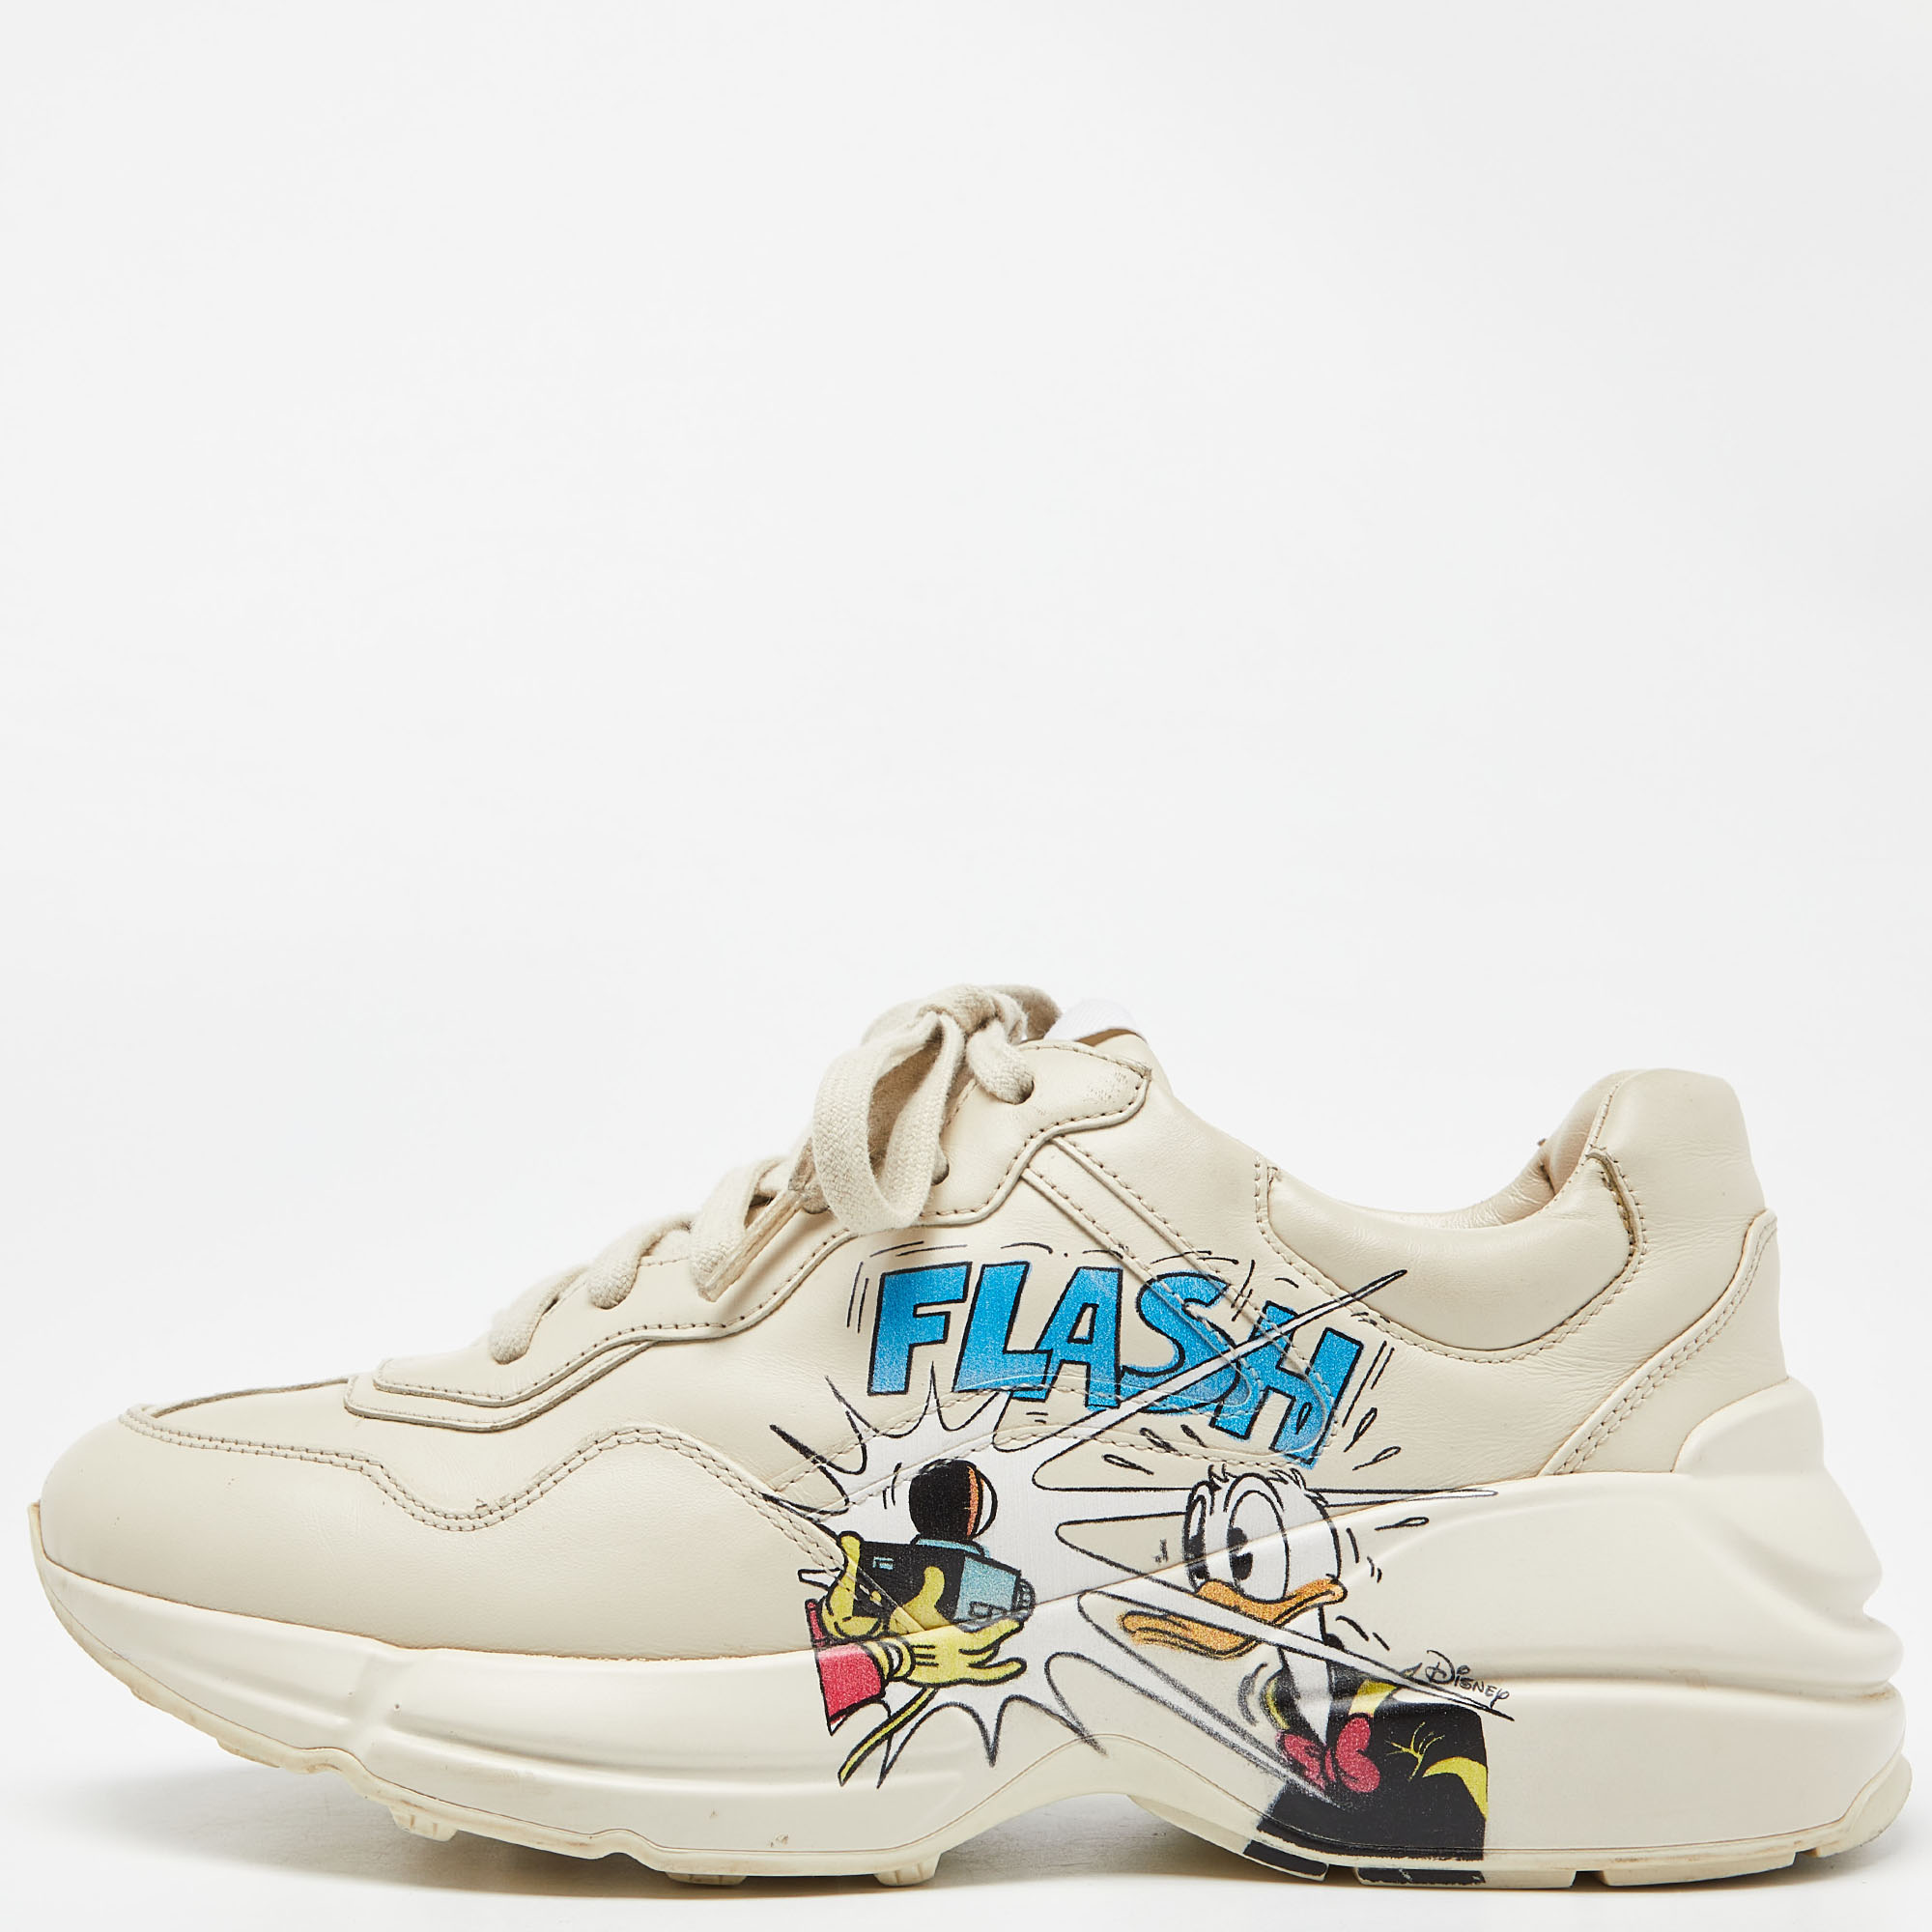 Gucci x disney donald duck cream leather rhyton sneakers size 38